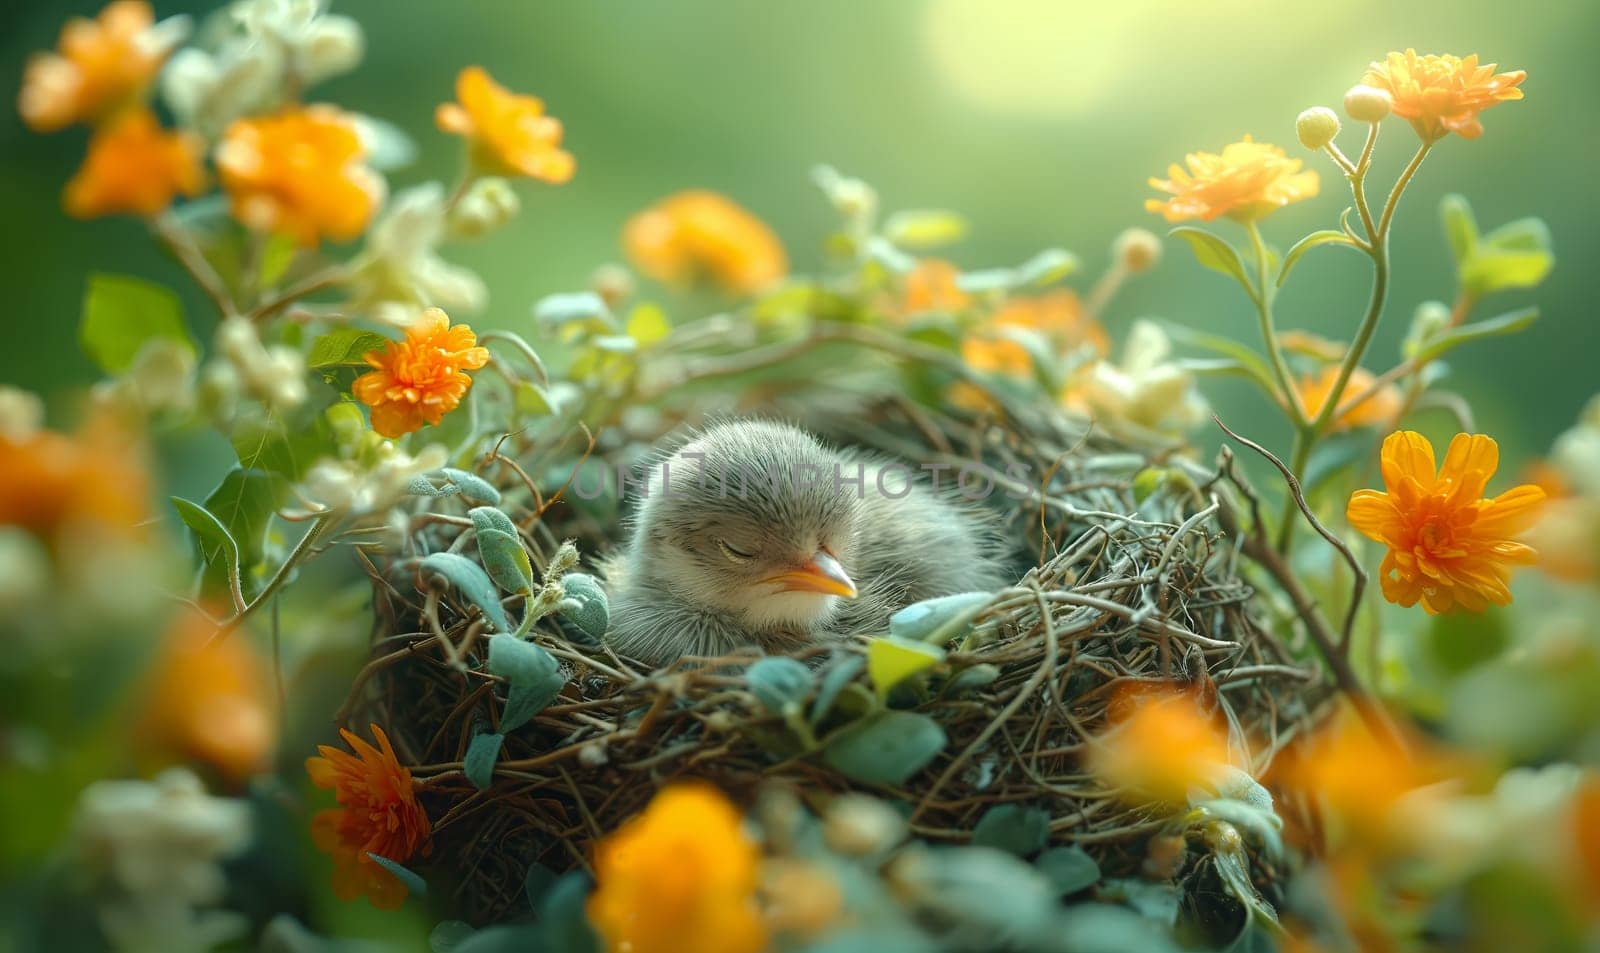 Baby Bird in Nest Surrounded by Flowers by Fischeron